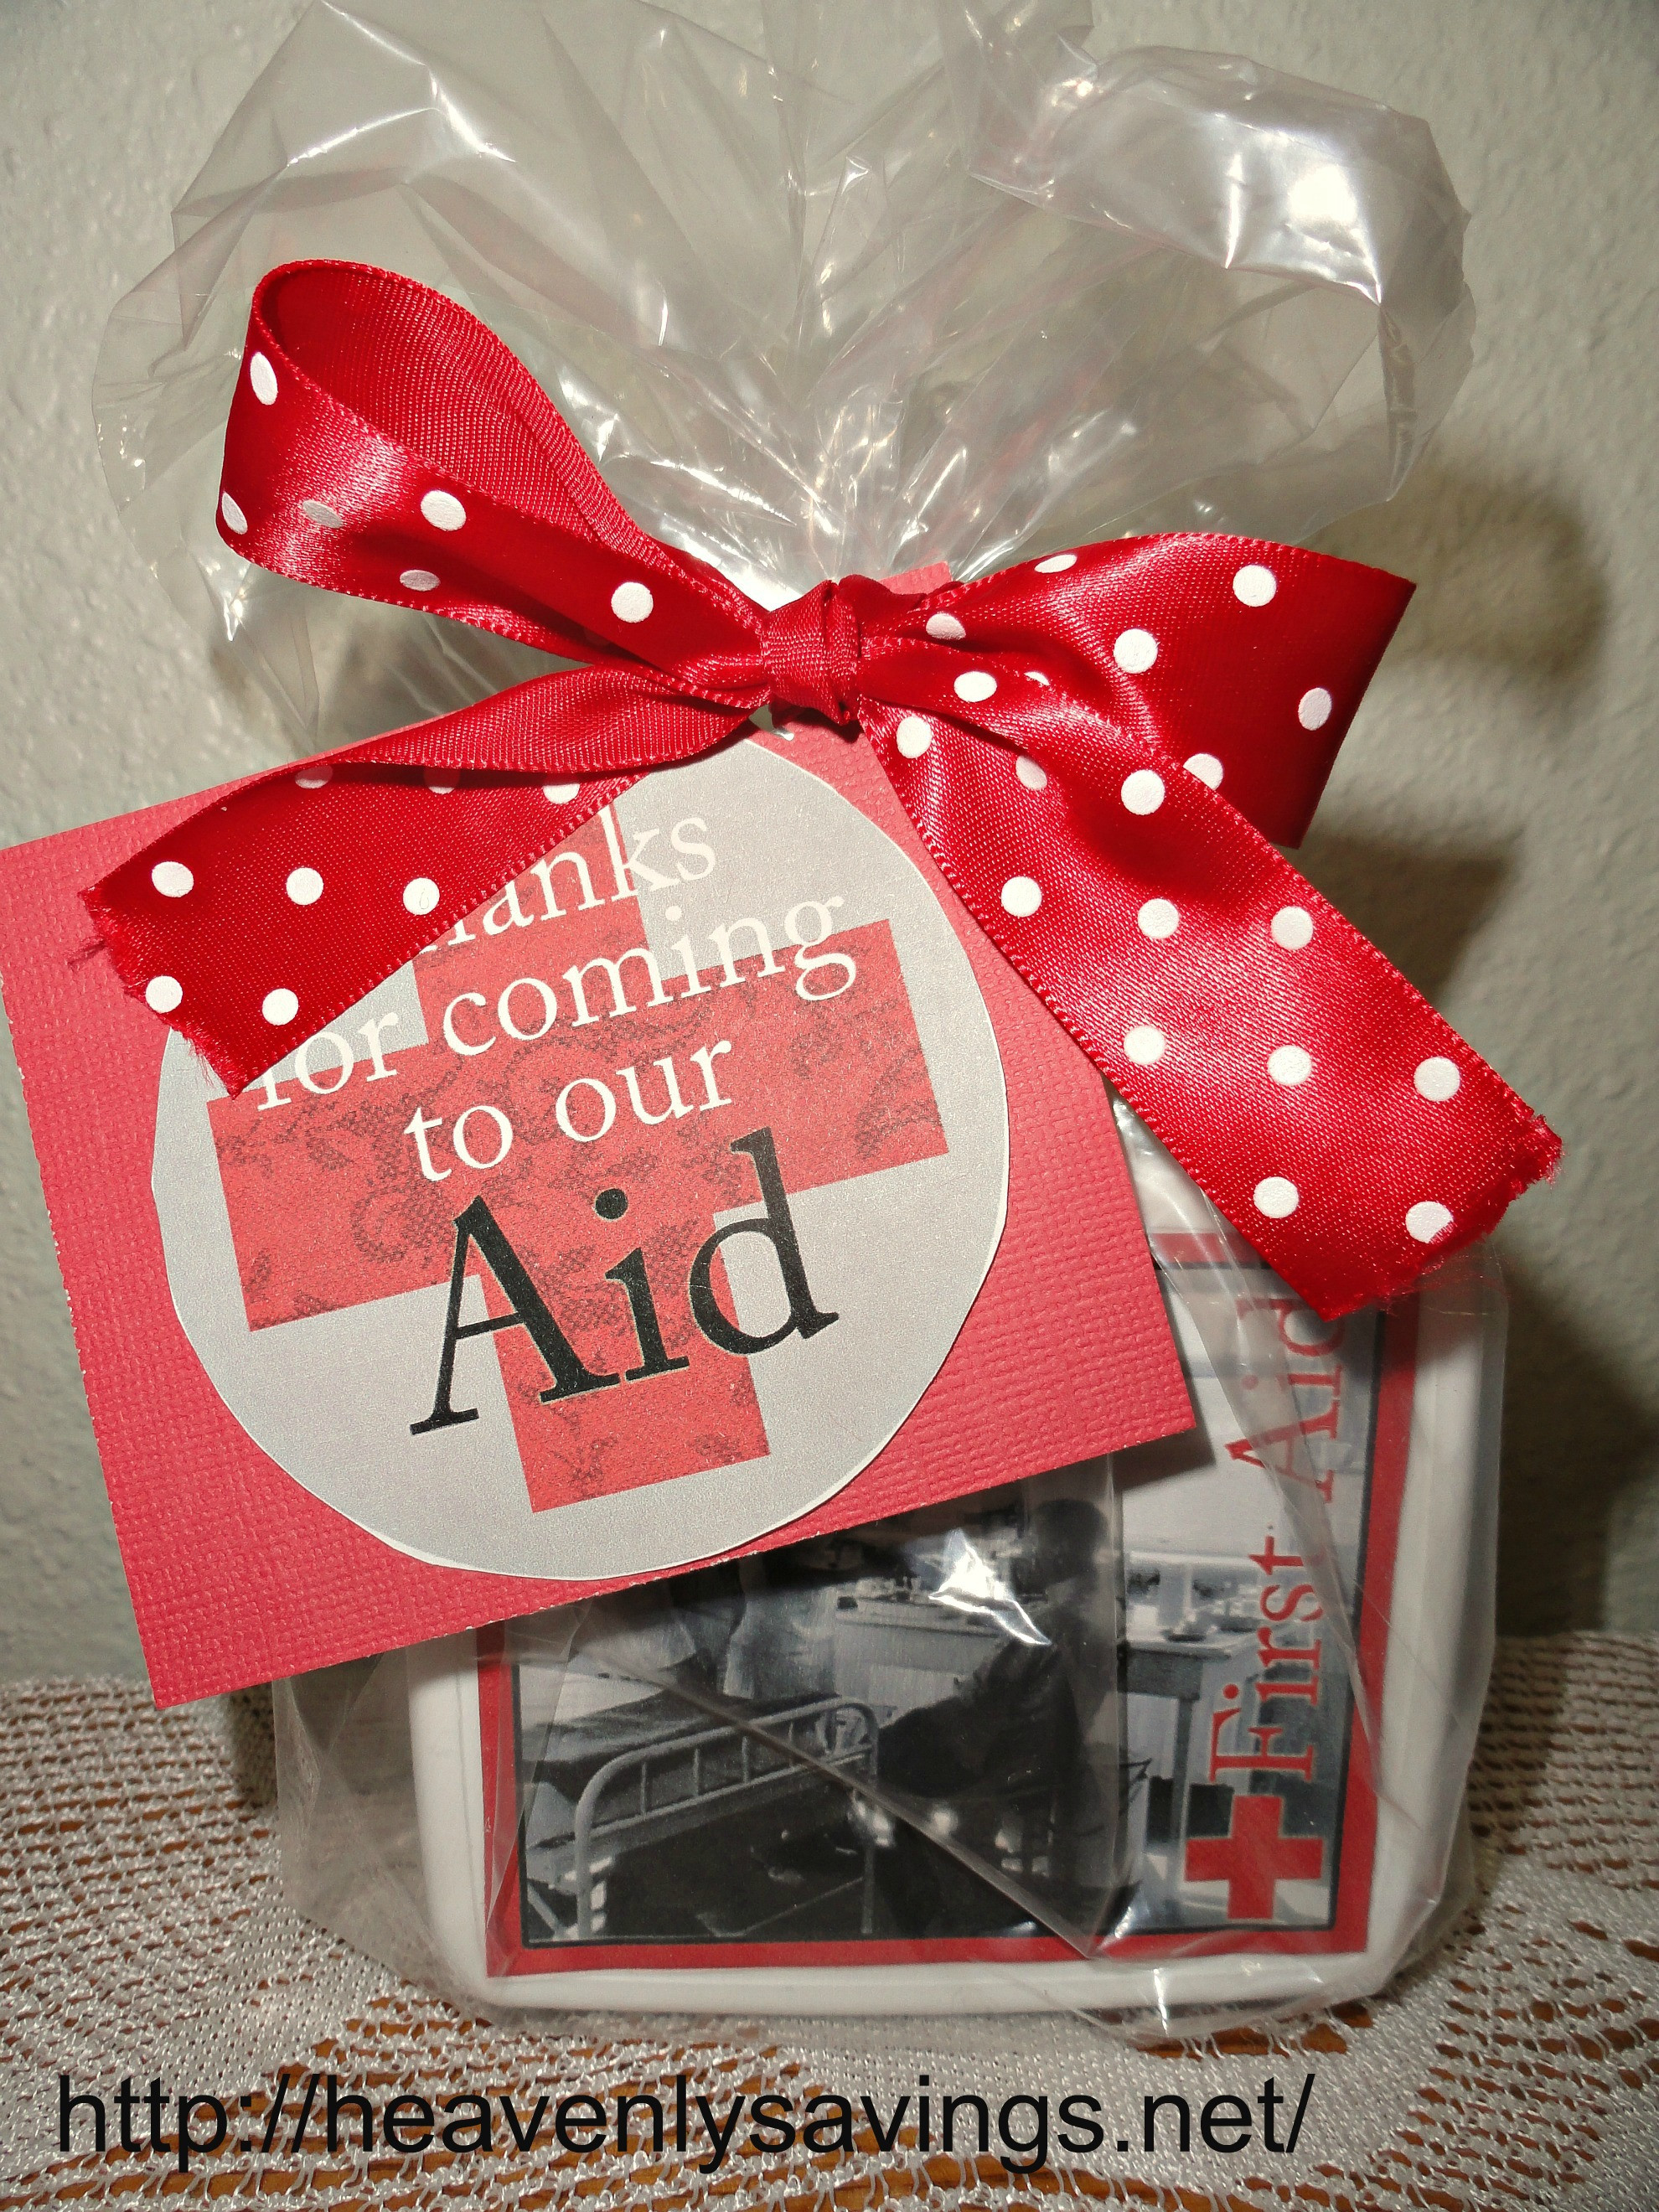 Diy Thank You Gift Ideas
 Cheap and Easy Thank You Gift